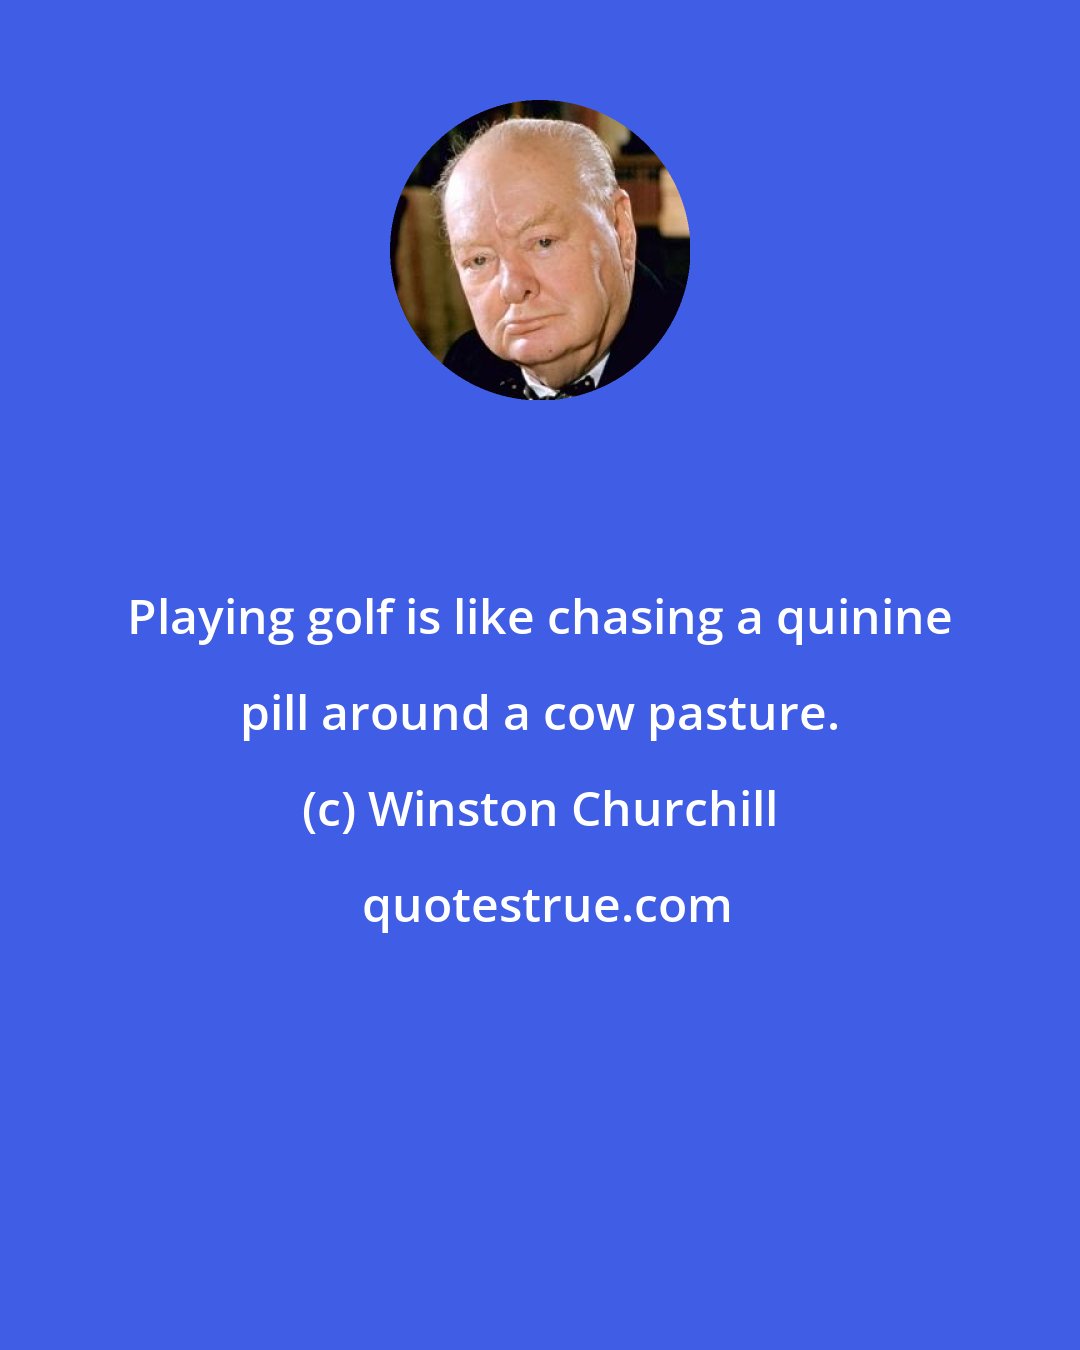 Winston Churchill: Playing golf is like chasing a quinine pill around a cow pasture.